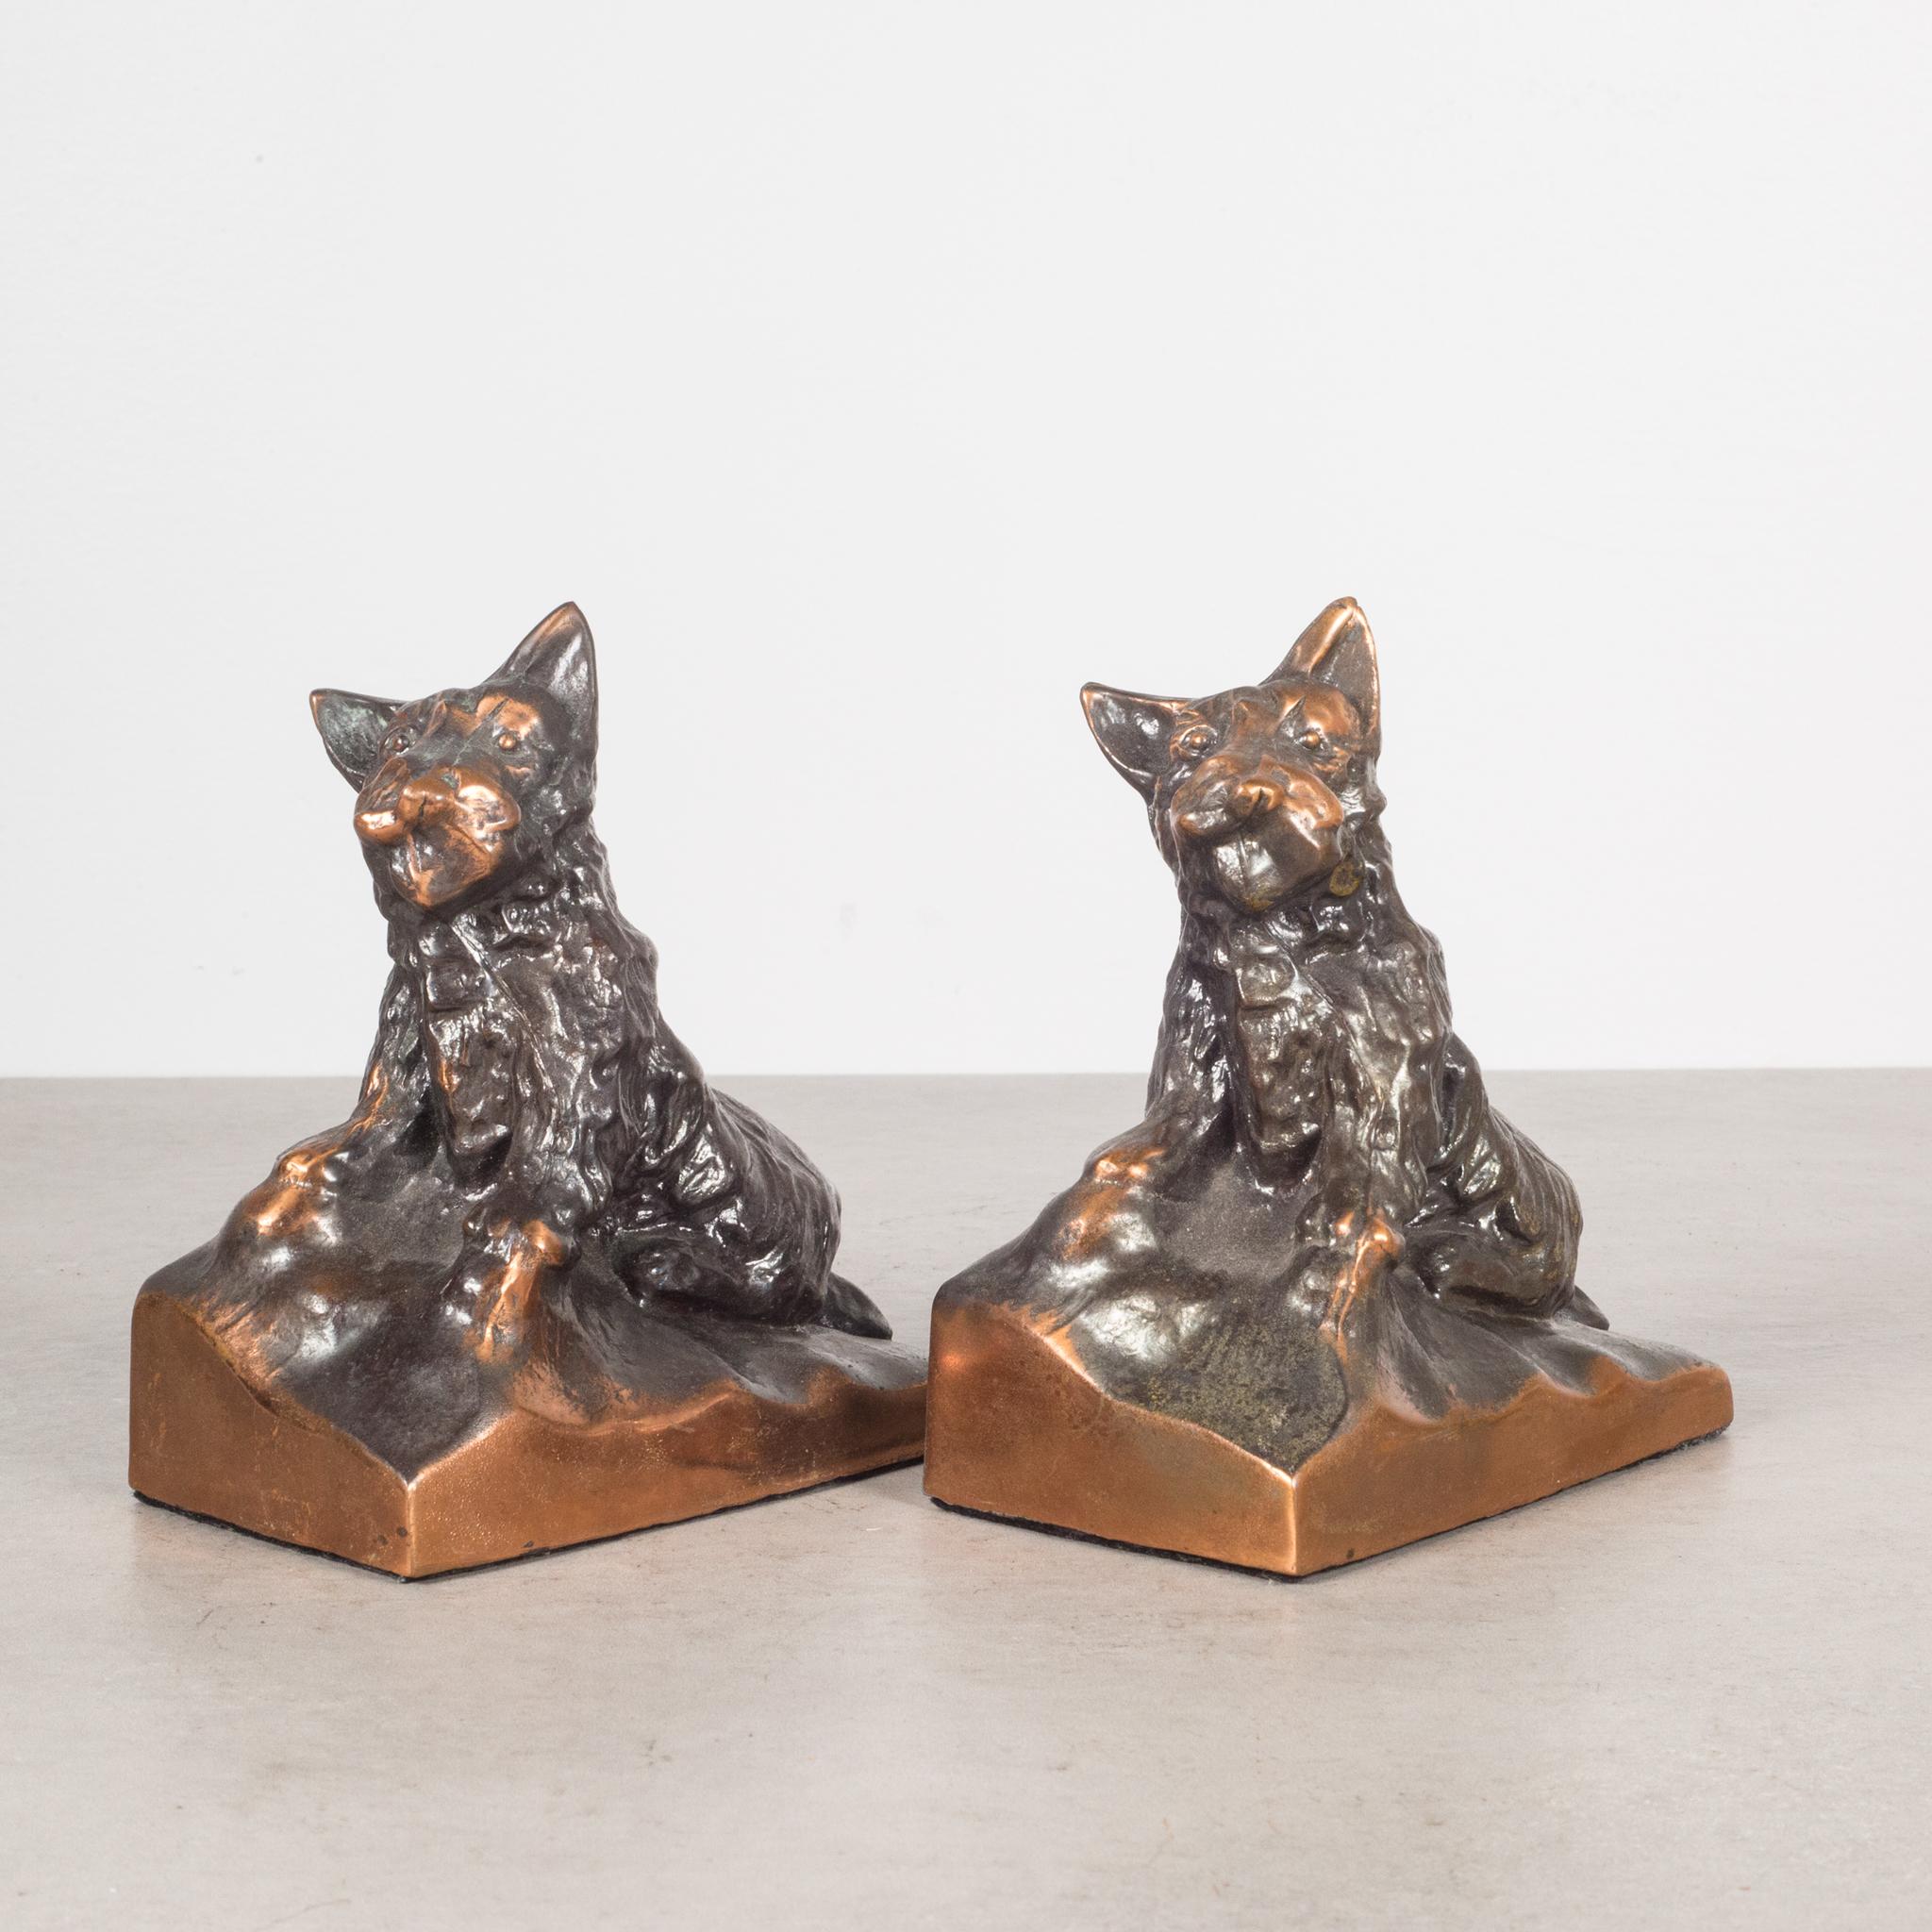 Industrial Bronze-Plated Scotty Dog Bookends, circa 1940